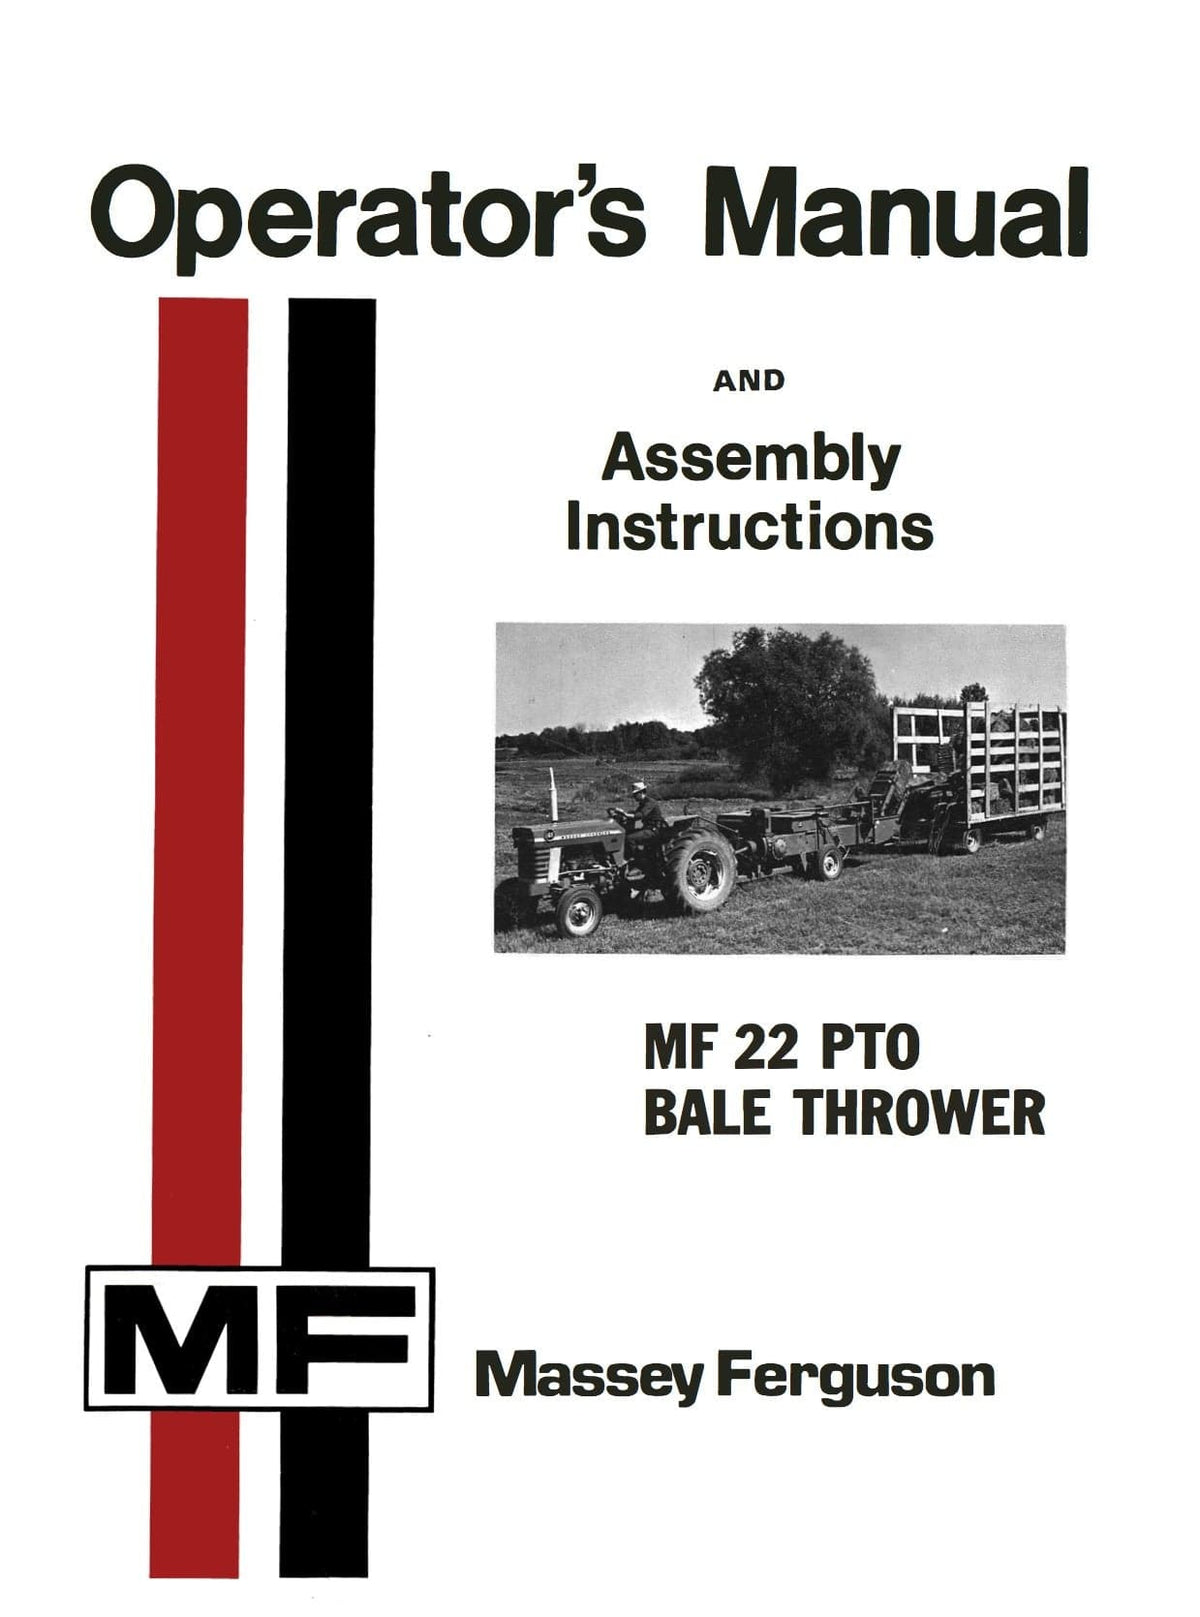 Massey Ferguson MF 22 PTO Bale Thrower - Operator's Manual and Assembly Instructions - Ag Manuals - A Provider of Digital Farm Manuals - 1